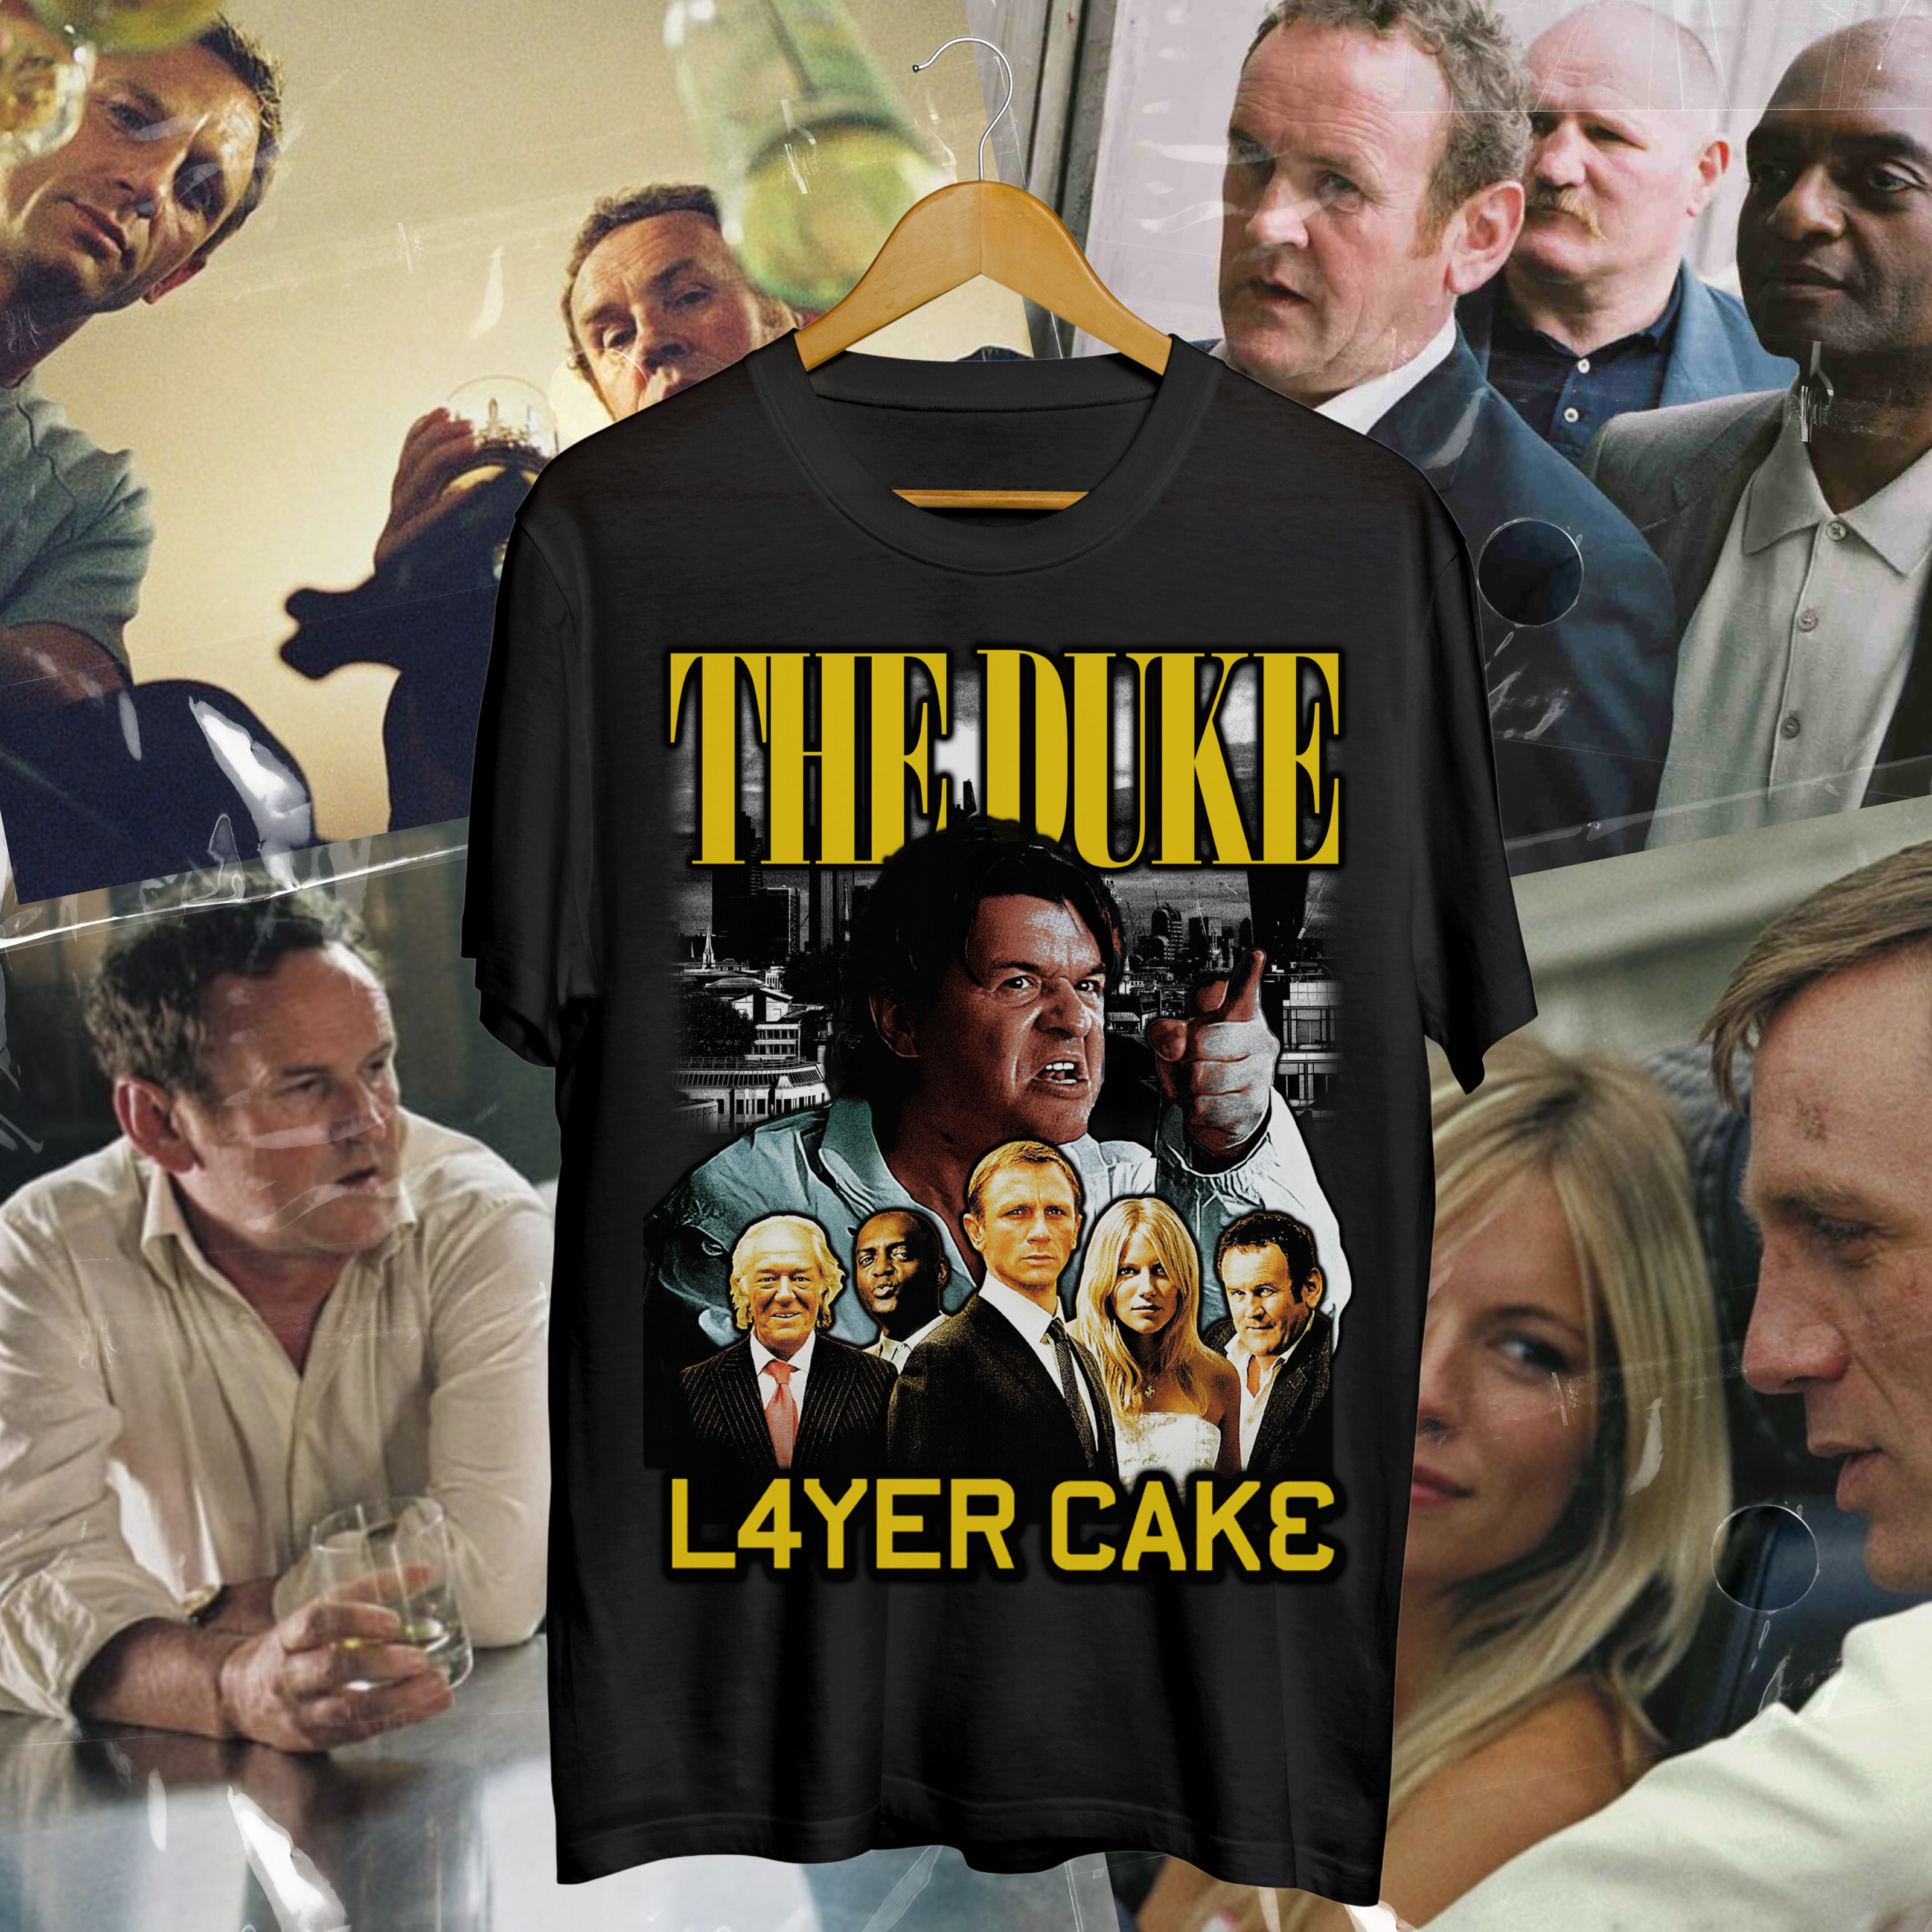 Layer Cake - The Duke - BACH T-ShirtBread And Cheese Hill